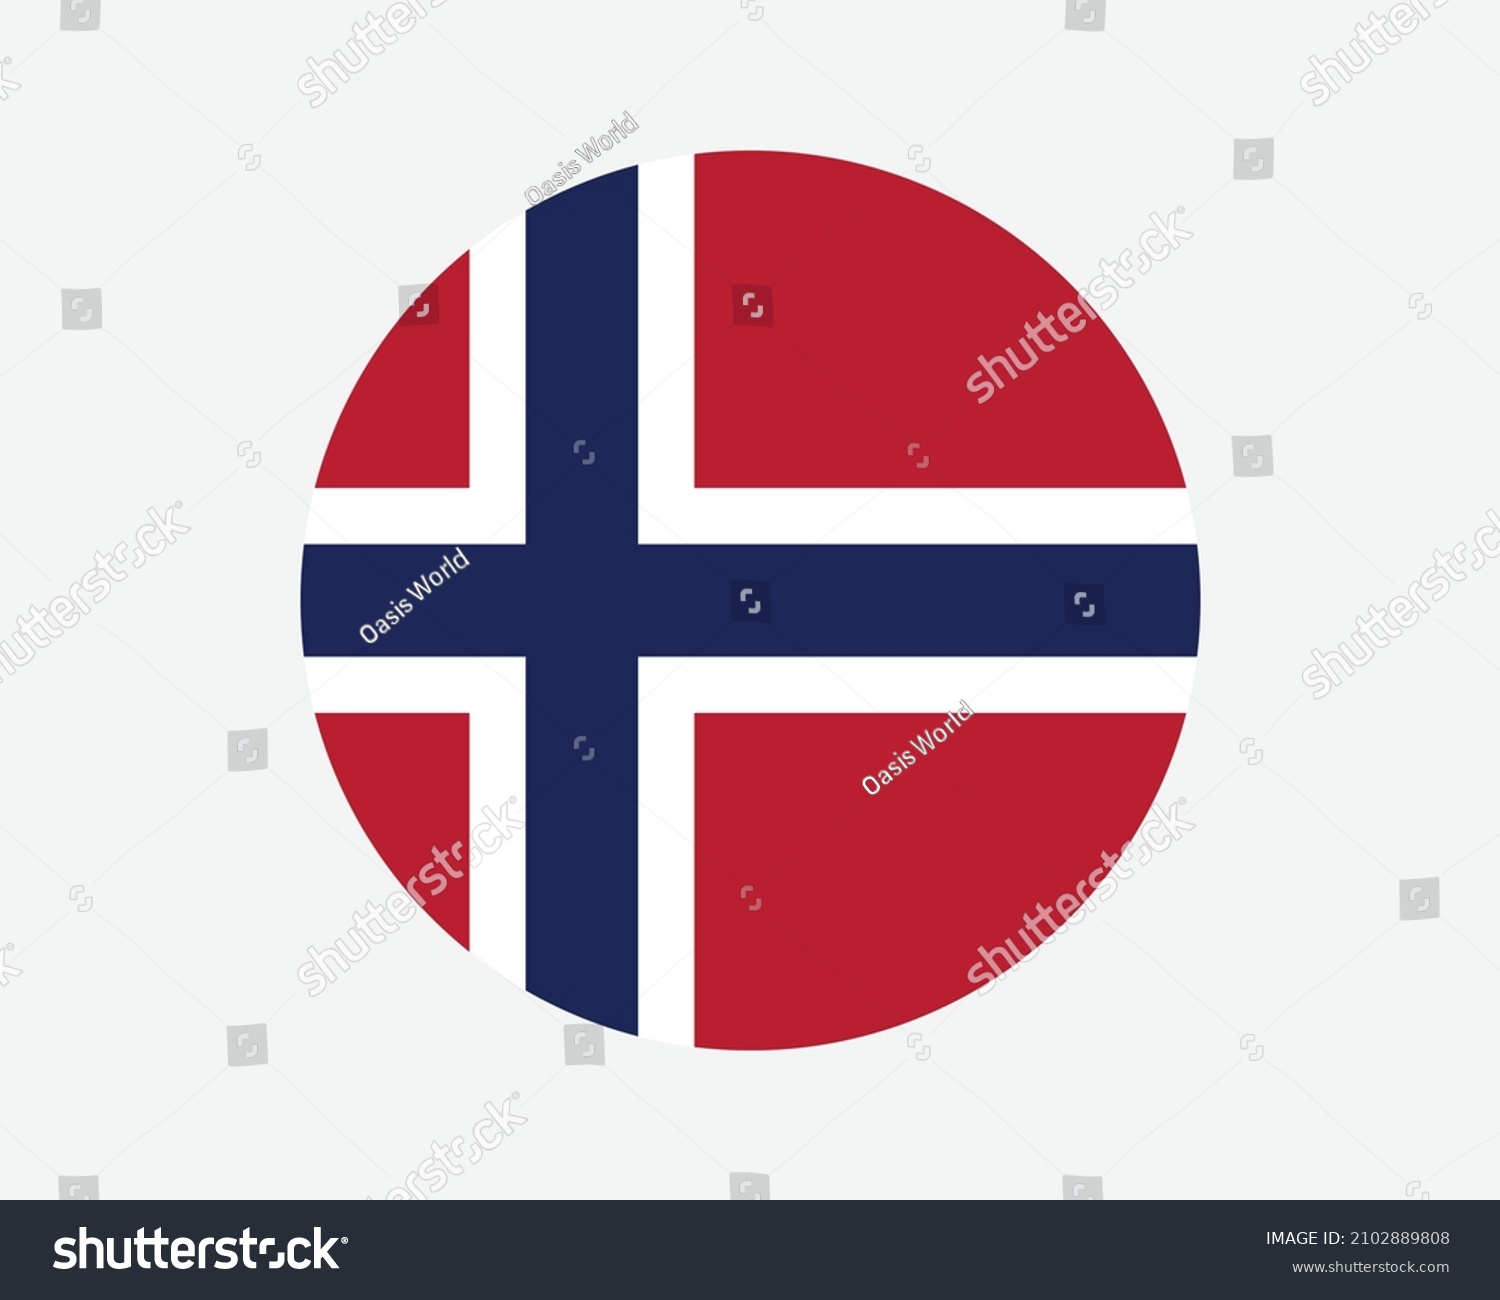 SVG of Norway Round Country Flag. Norwegian Circle National Flag. Kingdom of Norway Circular Shape Button Banner. EPS Vector Illustration. svg